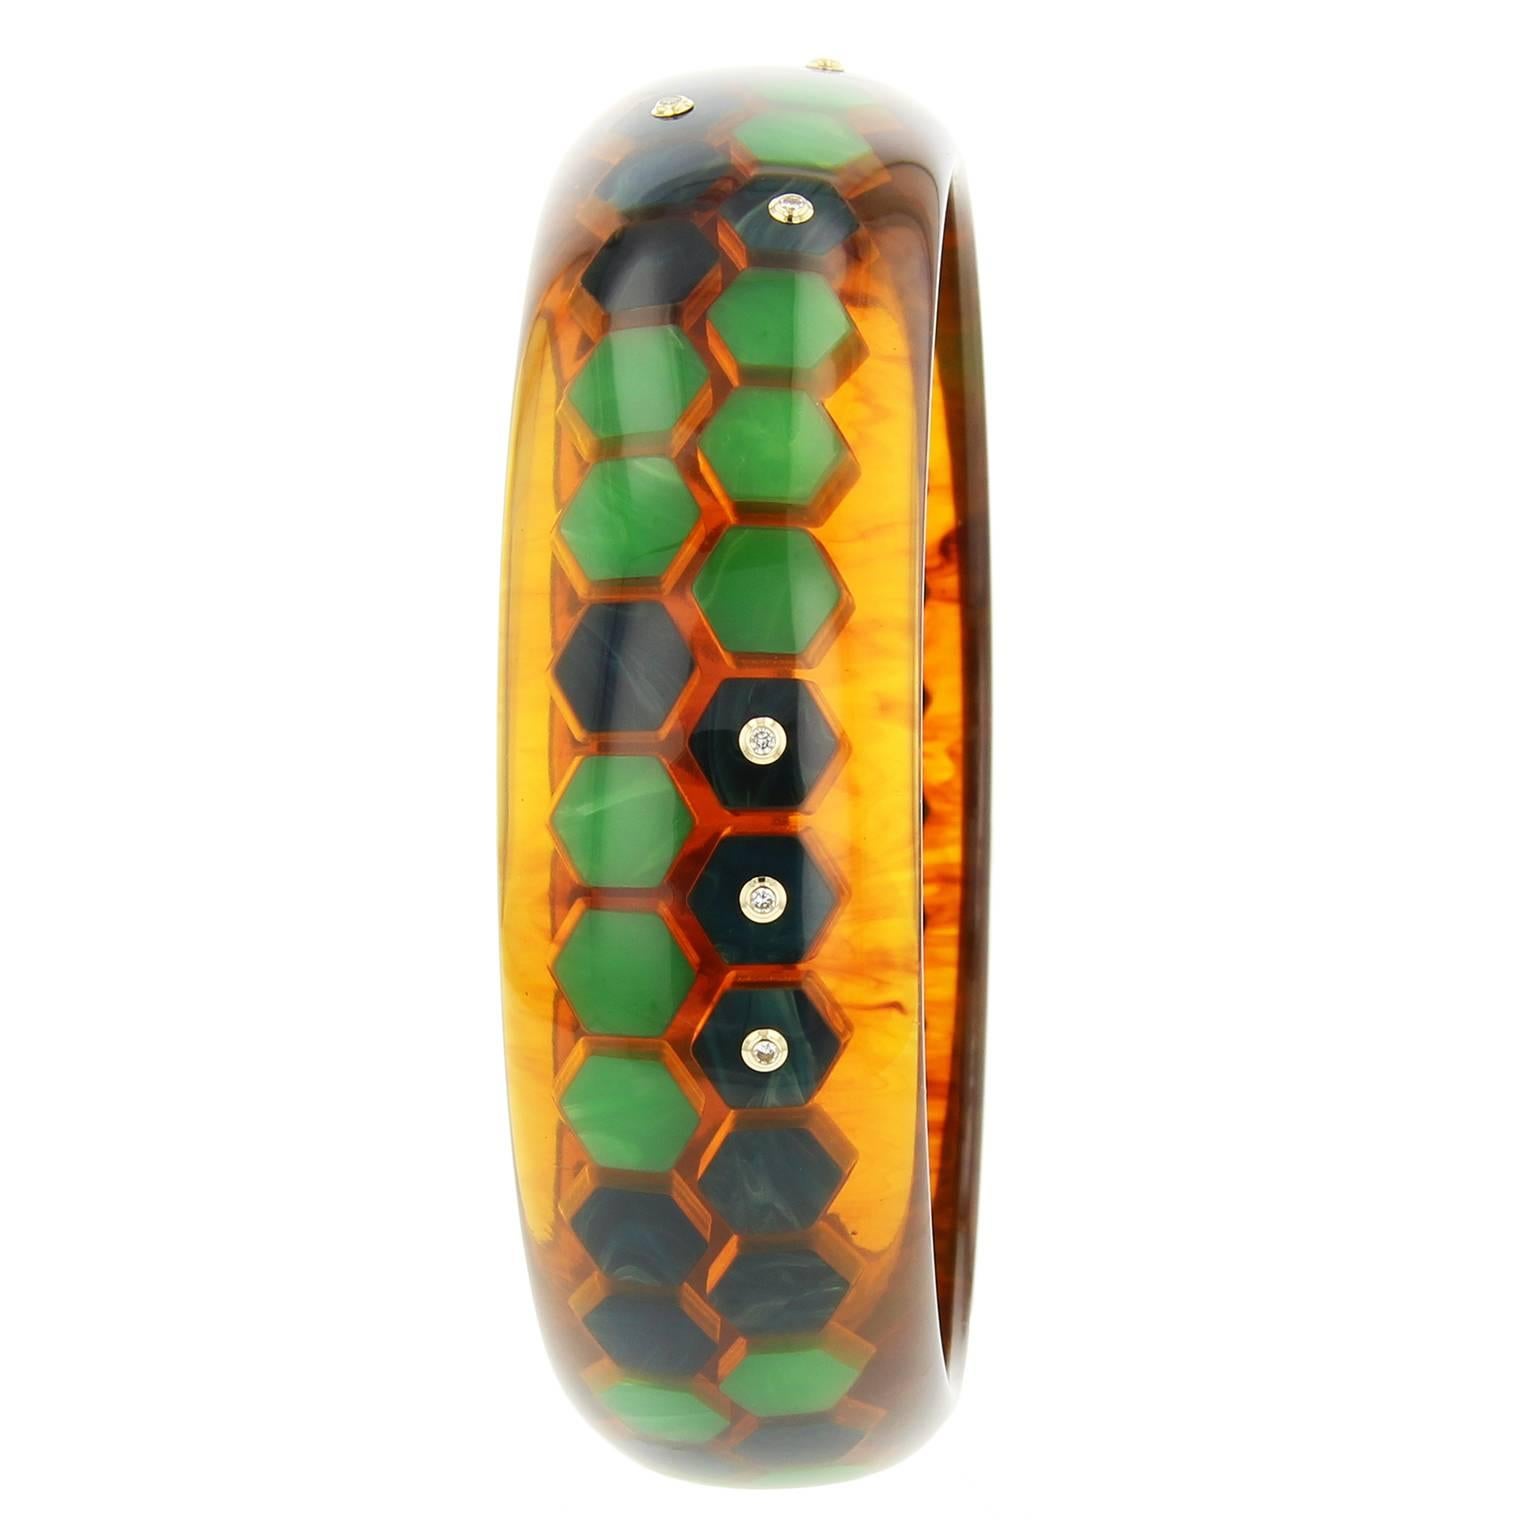 This chic Mark Davis bangle was handcrafted using tortoise vintage bakelite.  It was skillfully inlaid with hexagonal pieces of green and blue bakelite creating a honeycomb pattern.  Fine diamonds set in 18k yellow gold bezels are randomly applied